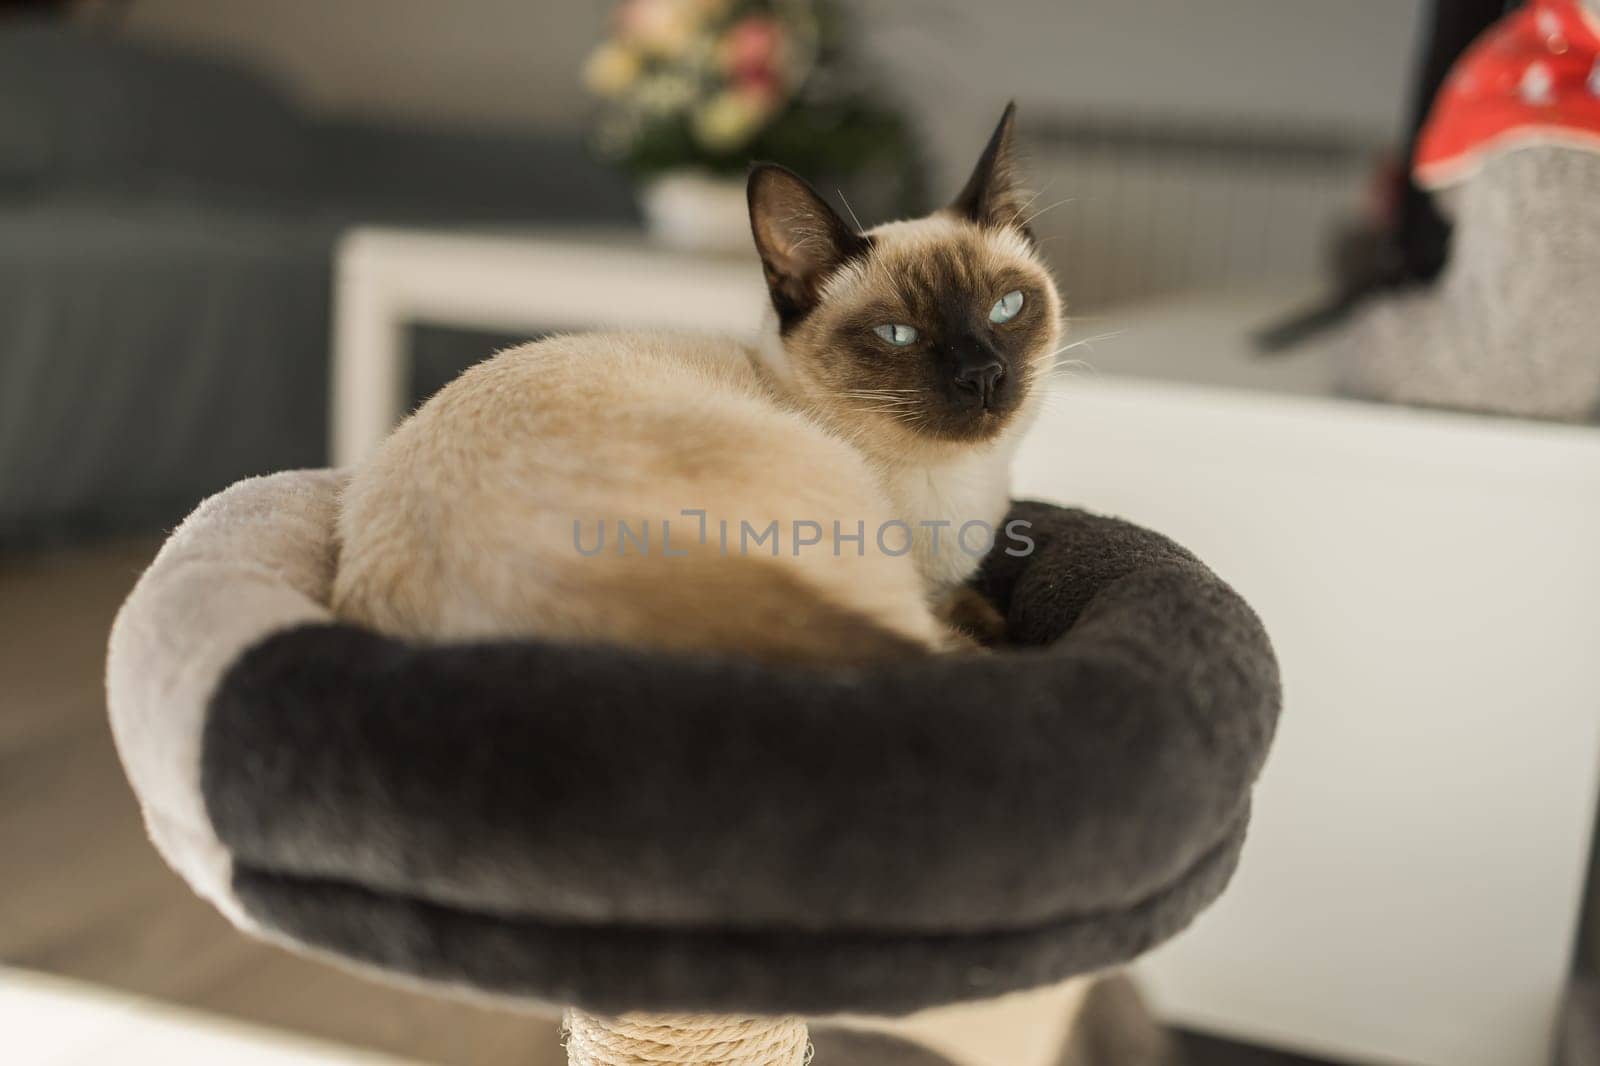 Small siamese cat sleeping on her cat's bed with soft cozy environment. Pet concept.